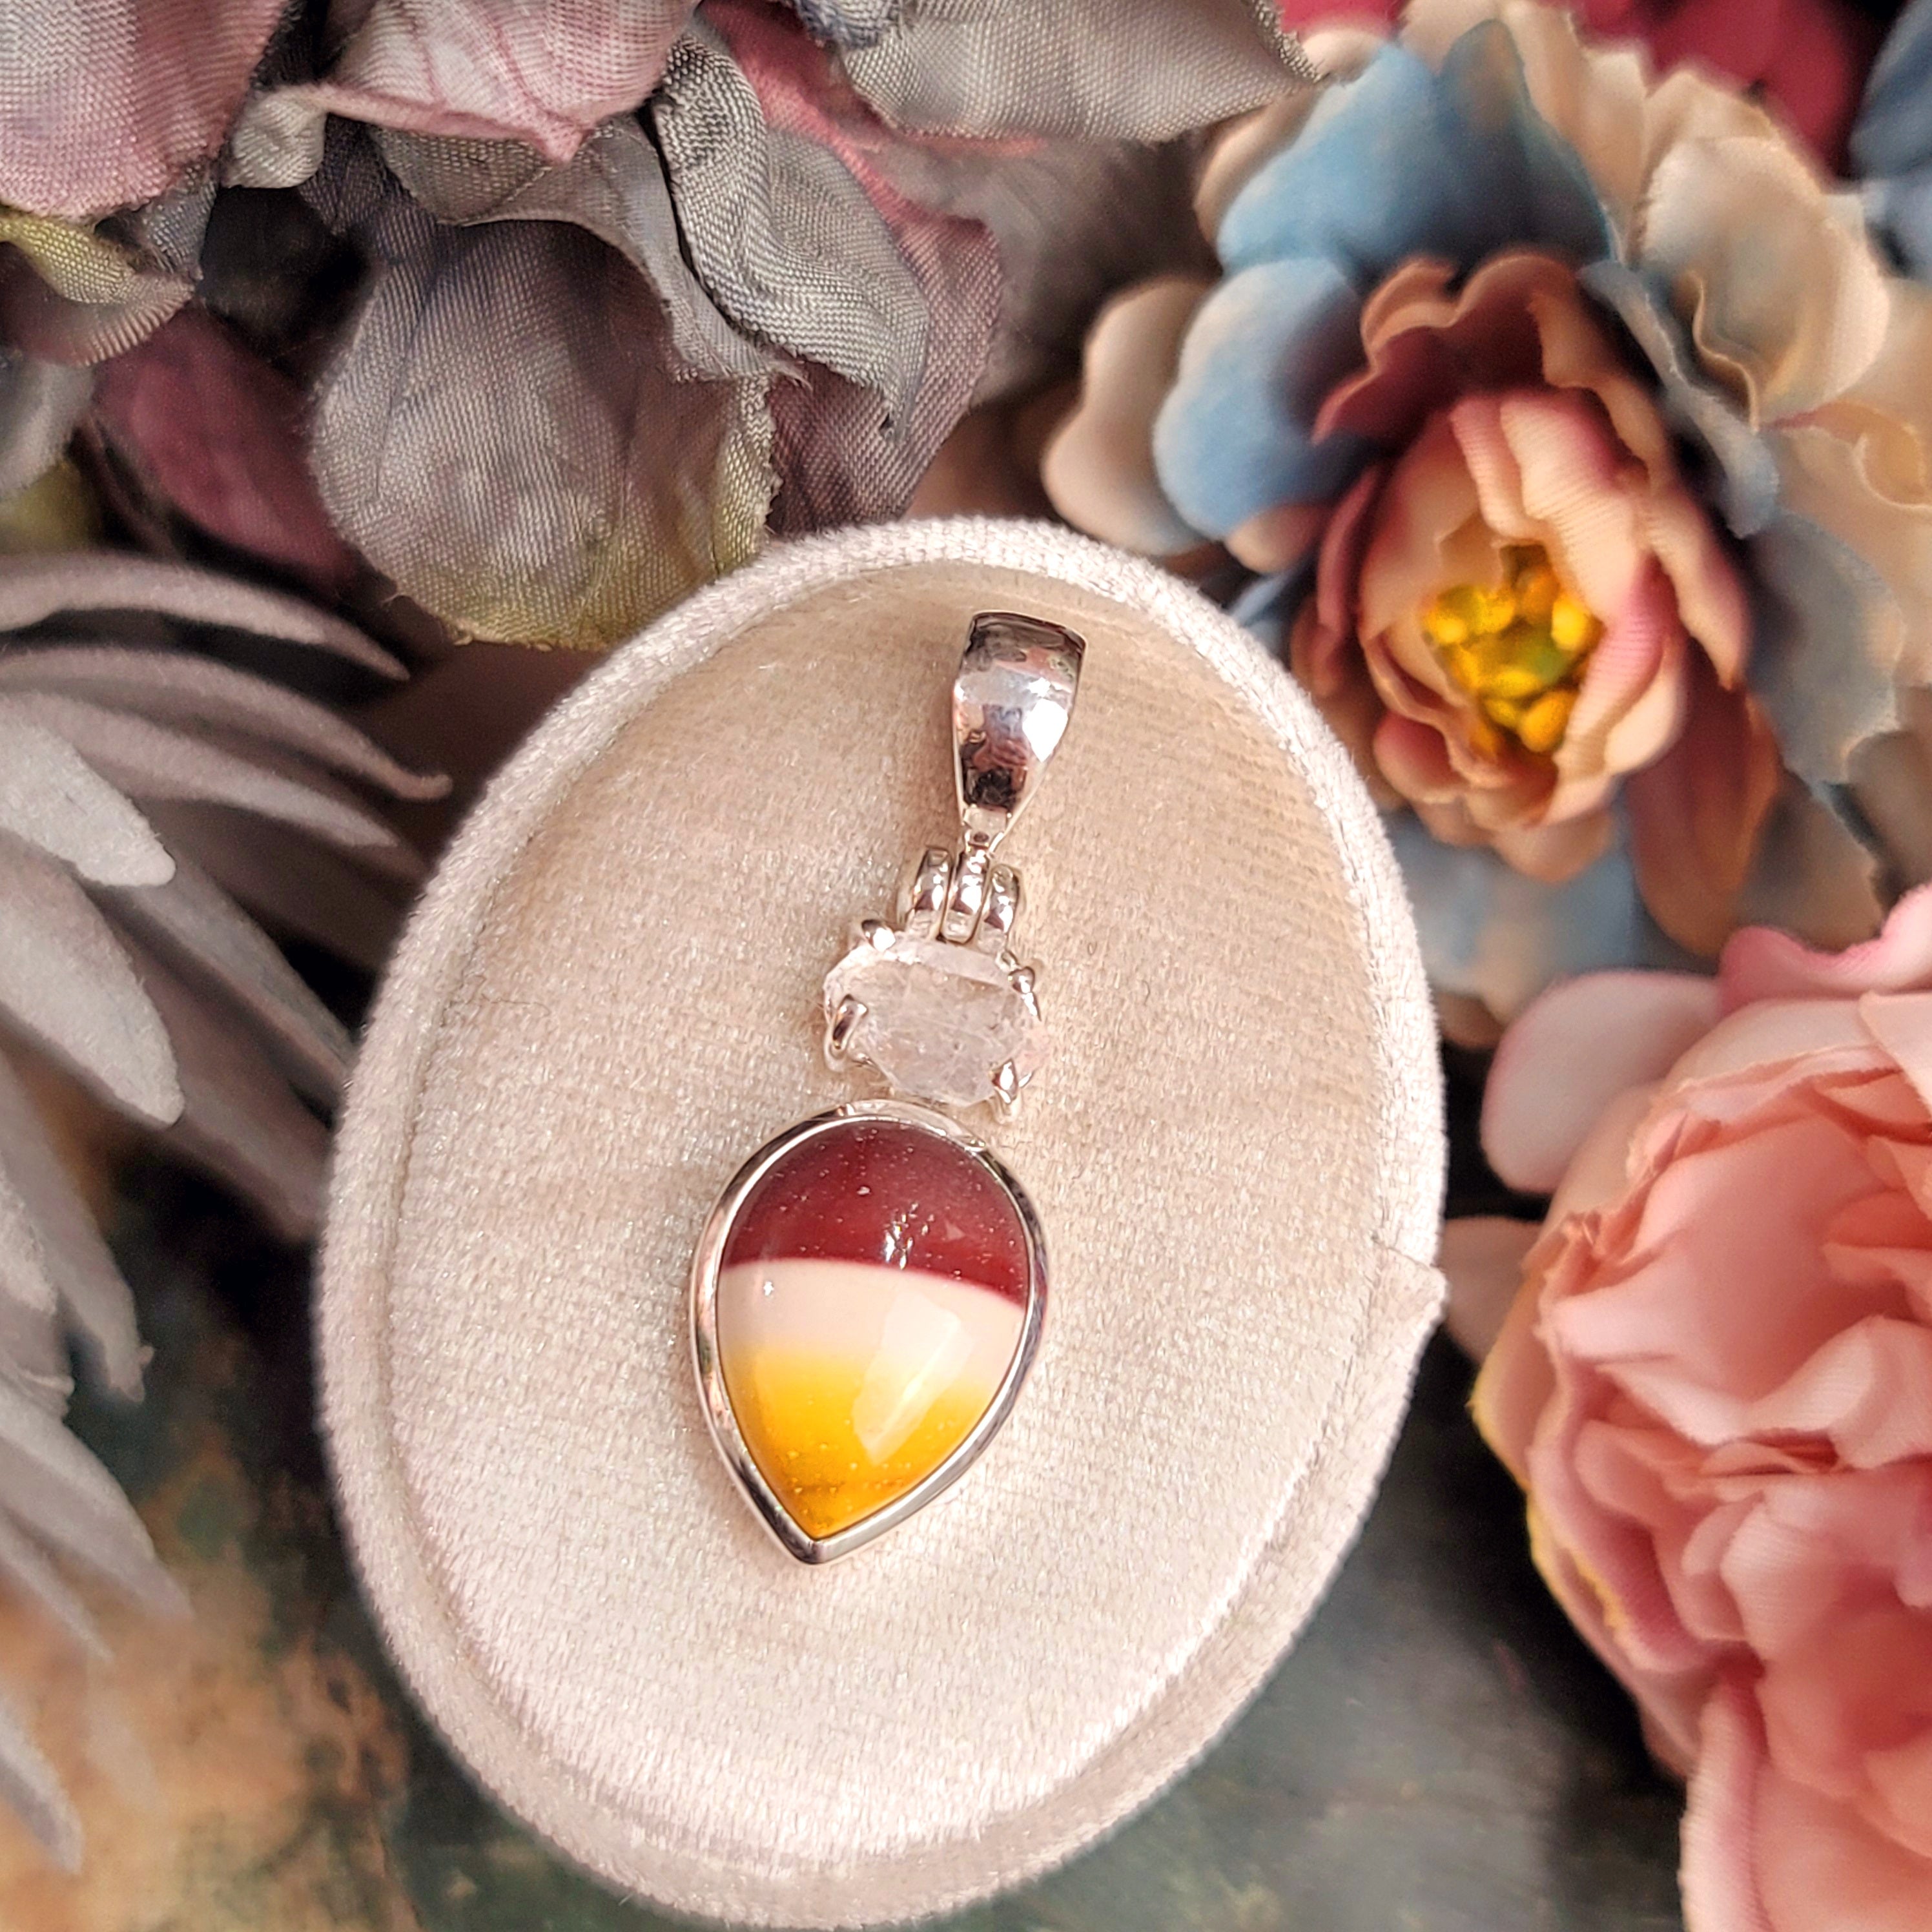 Mookaite Jasper & Herkimer Diamond Pendant for Personal Power and Youthful Beauty